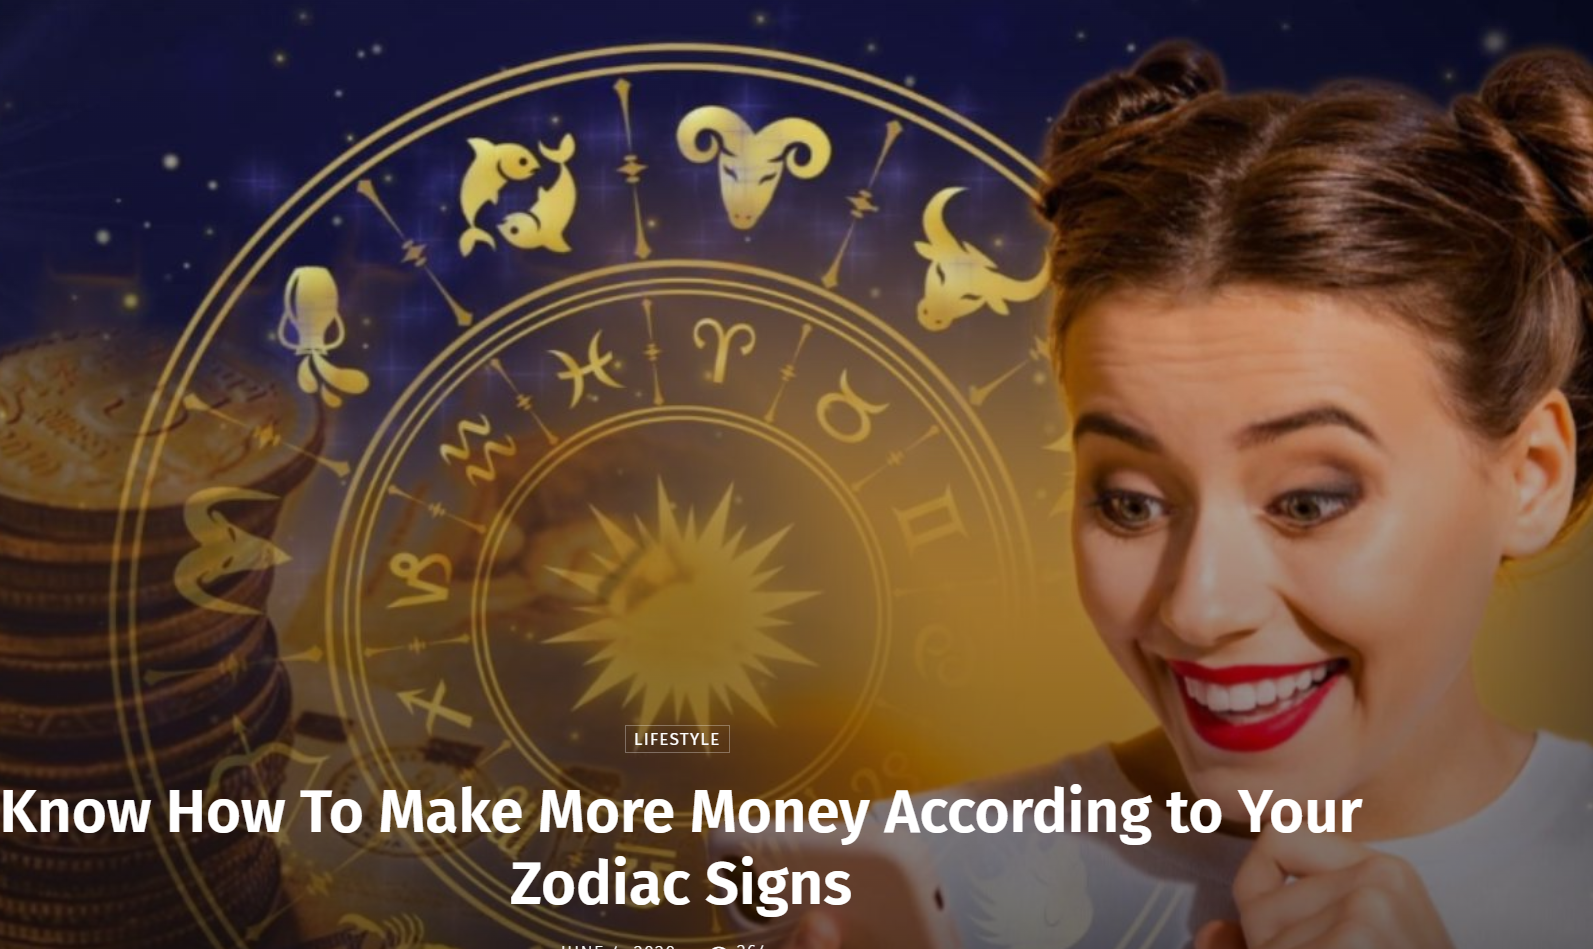 How to Earn More Money in 2022 Base on Your Zodiac Sign